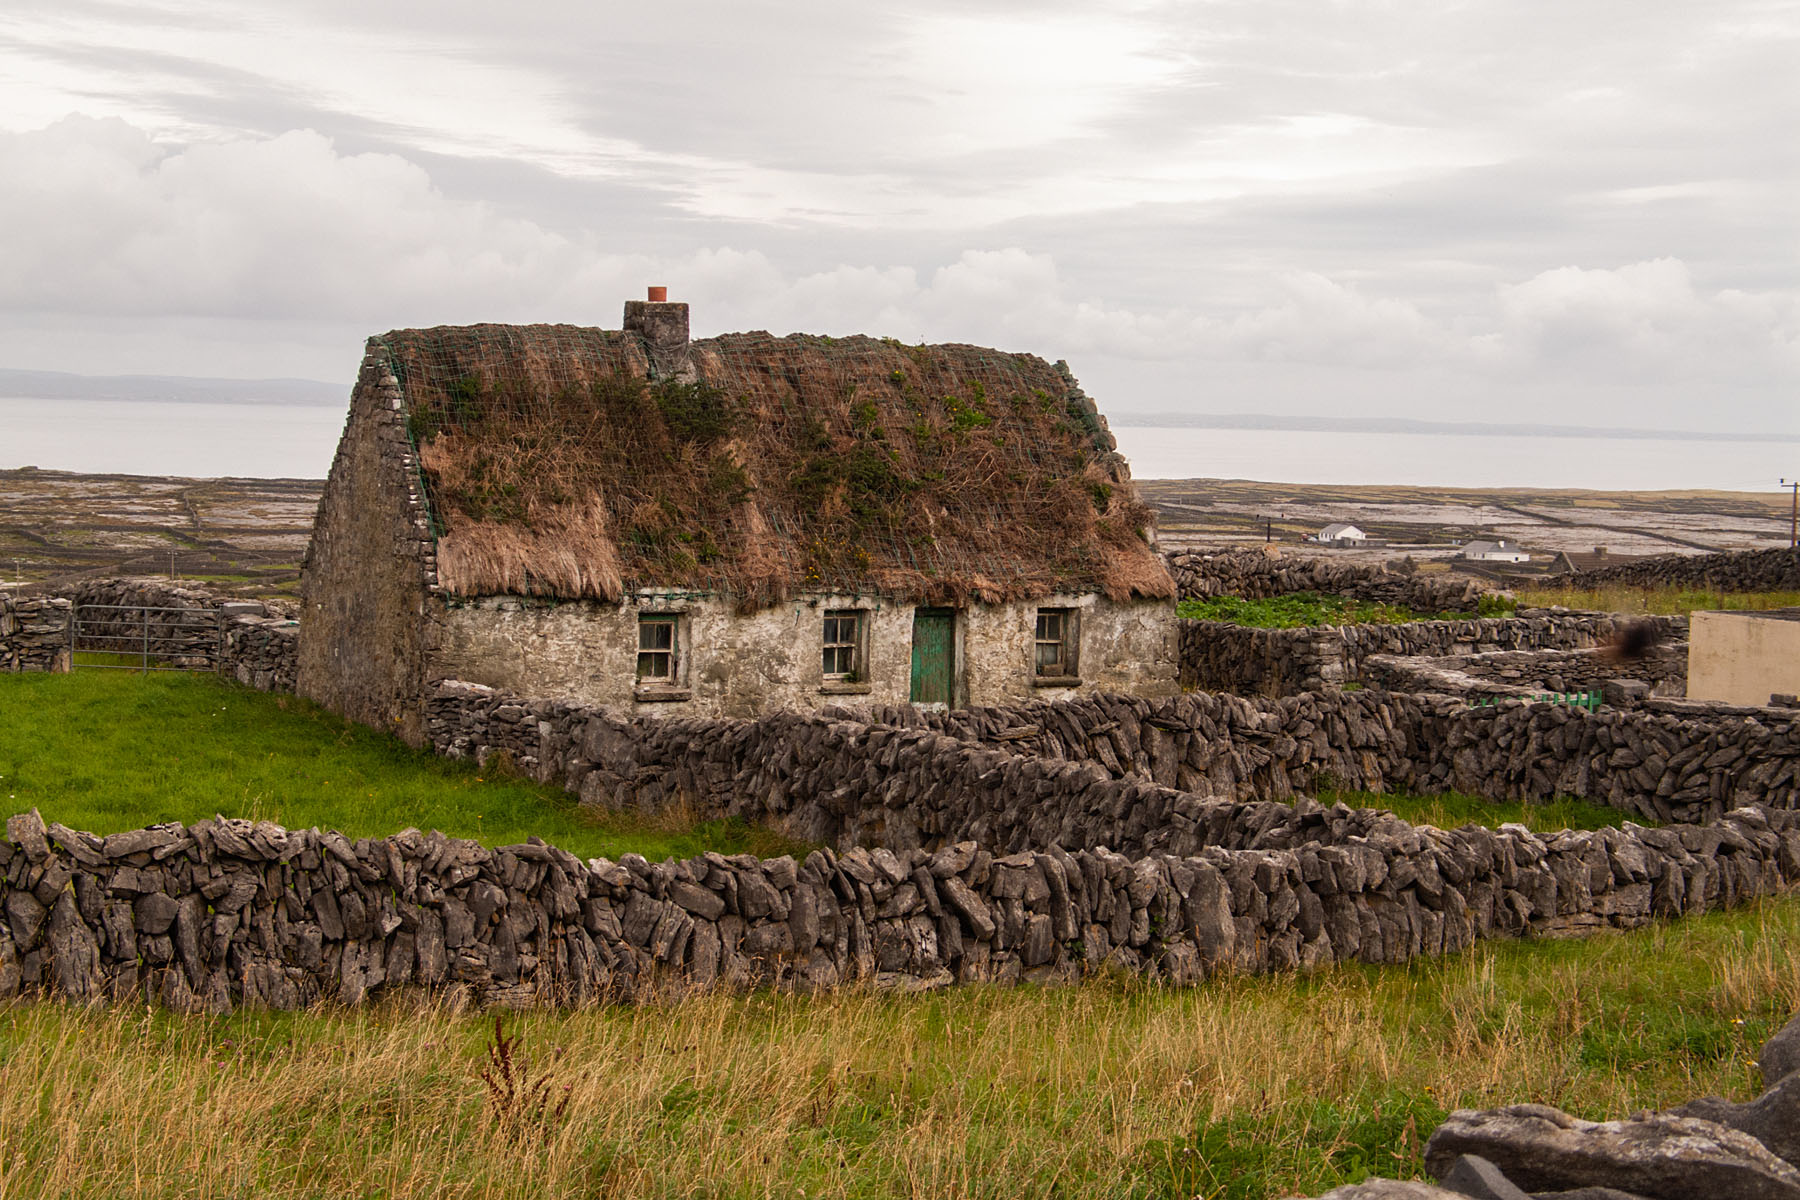 Thatch-roofed cottage, Inis Meáin, Ireland.  Click for next photo.